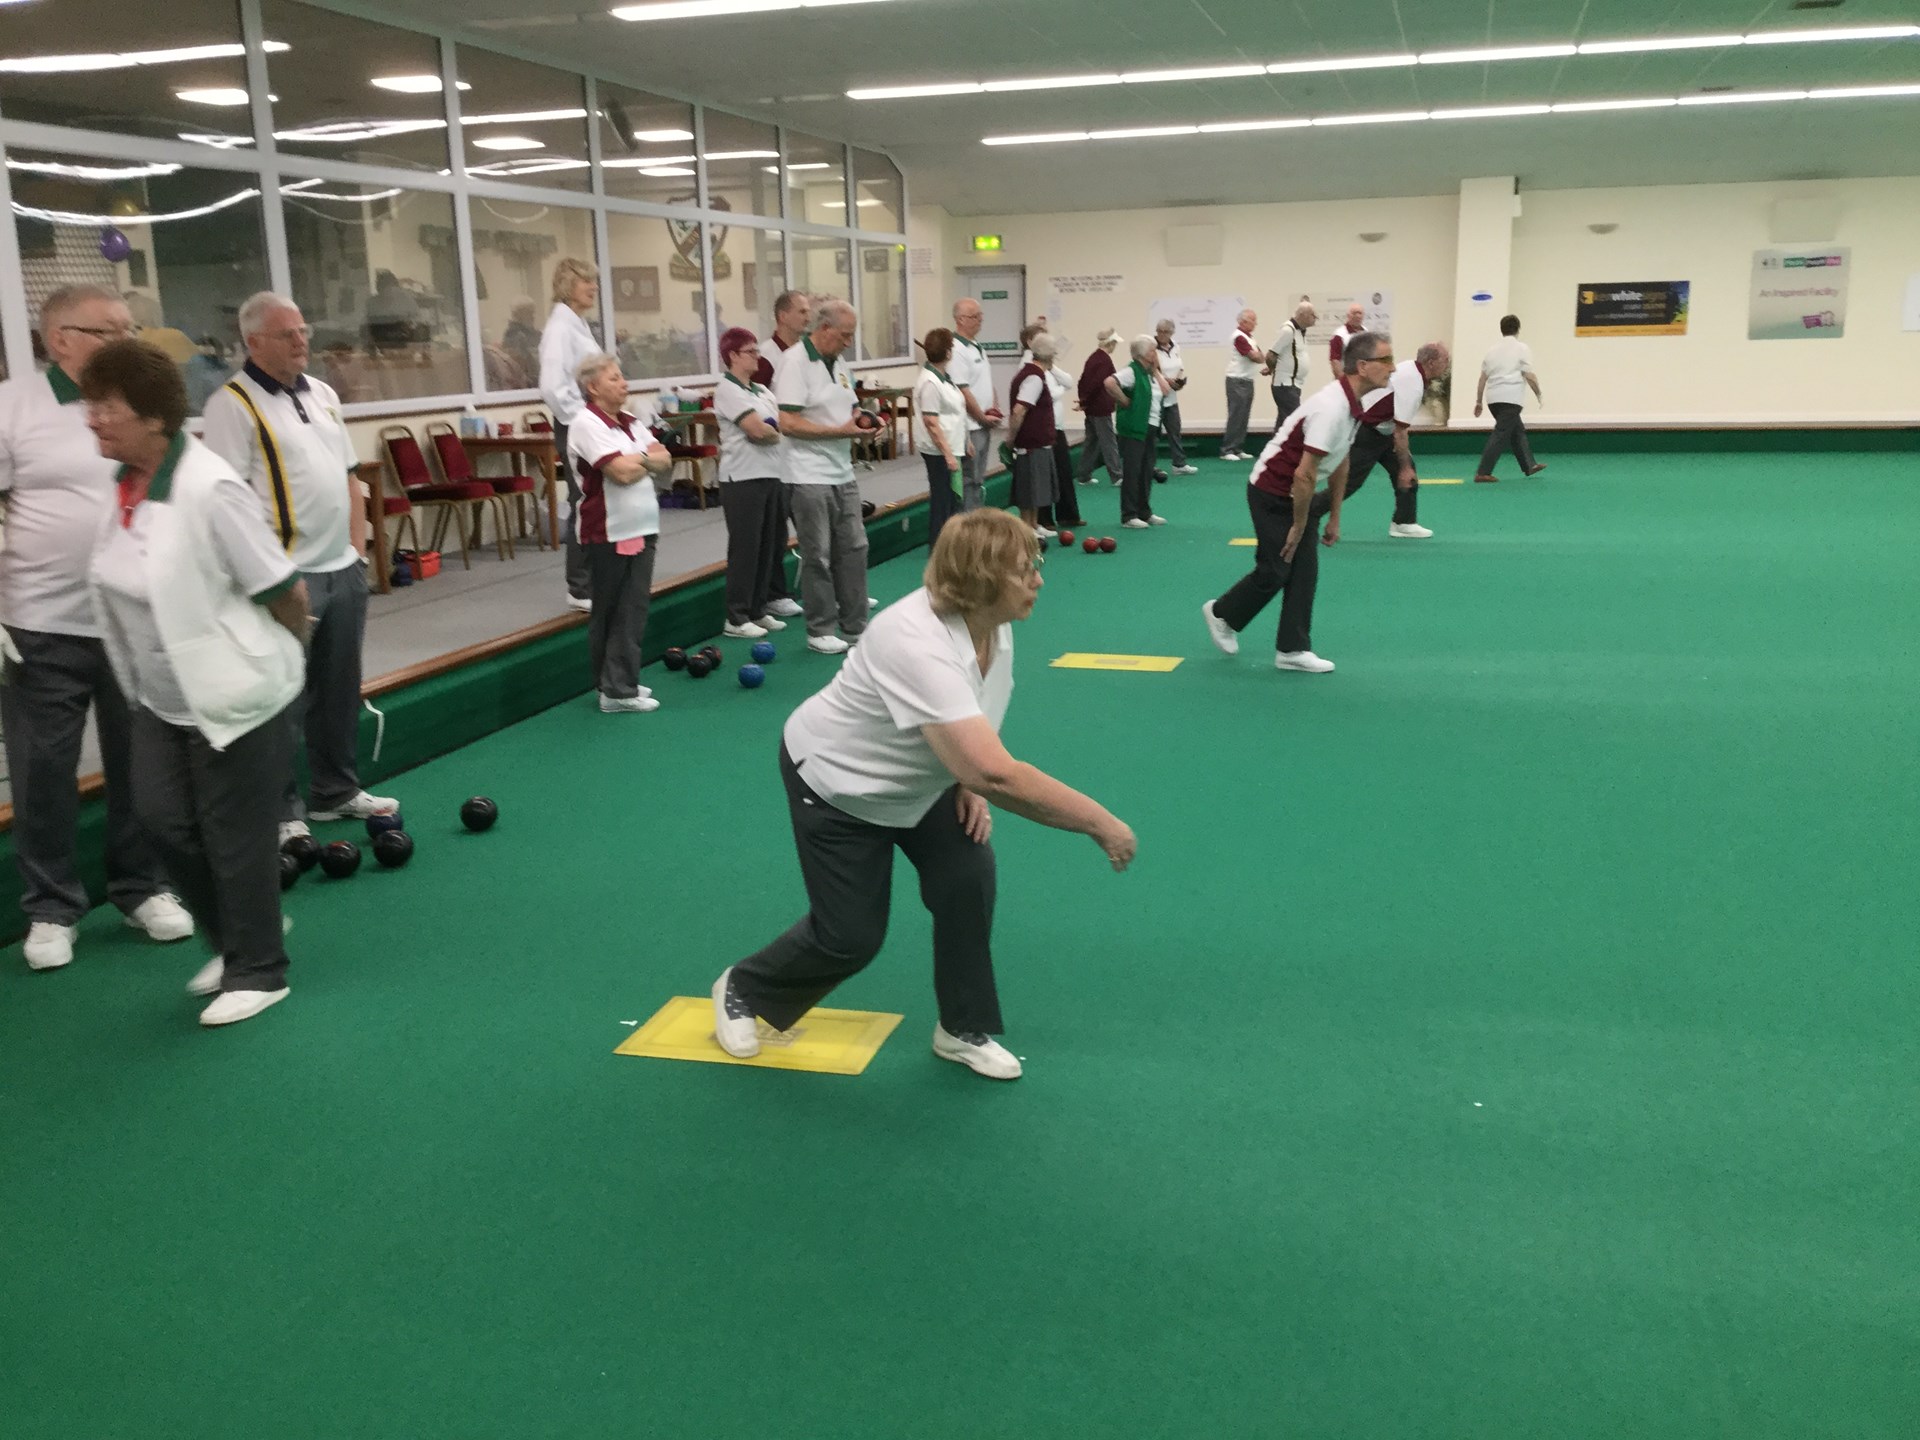 Bowlers in action